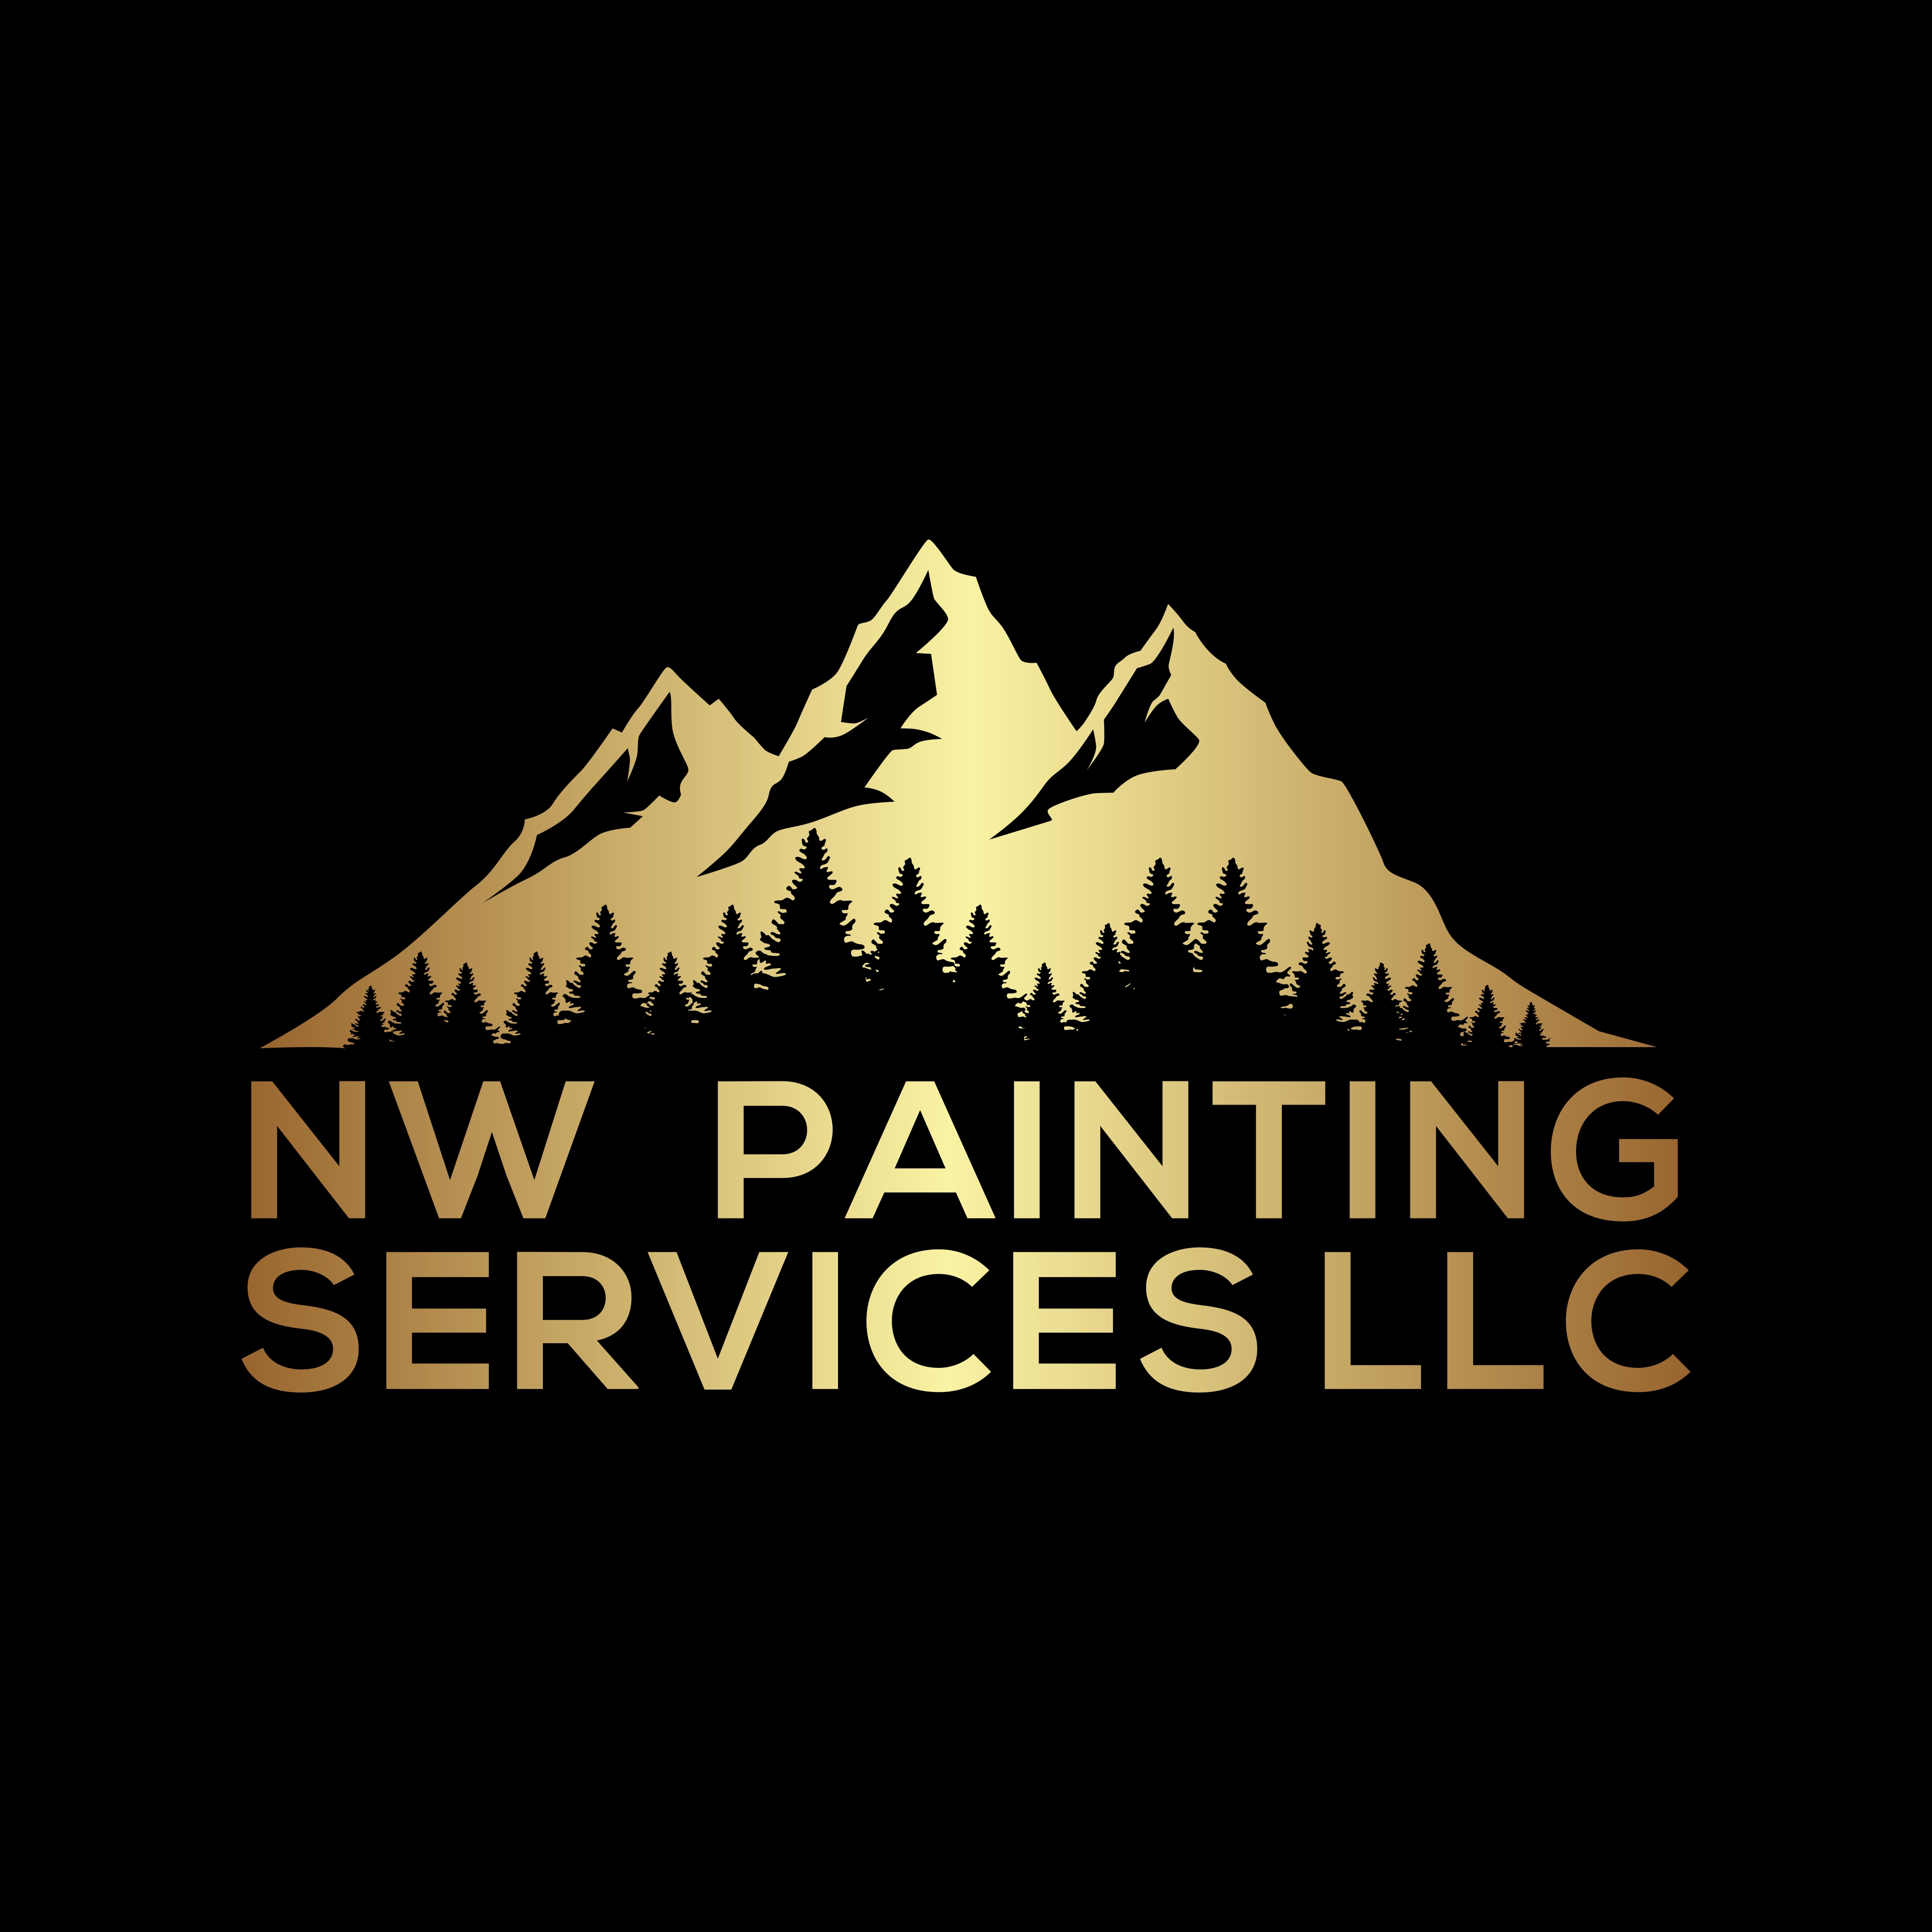 NW Painting Services LLC Logo